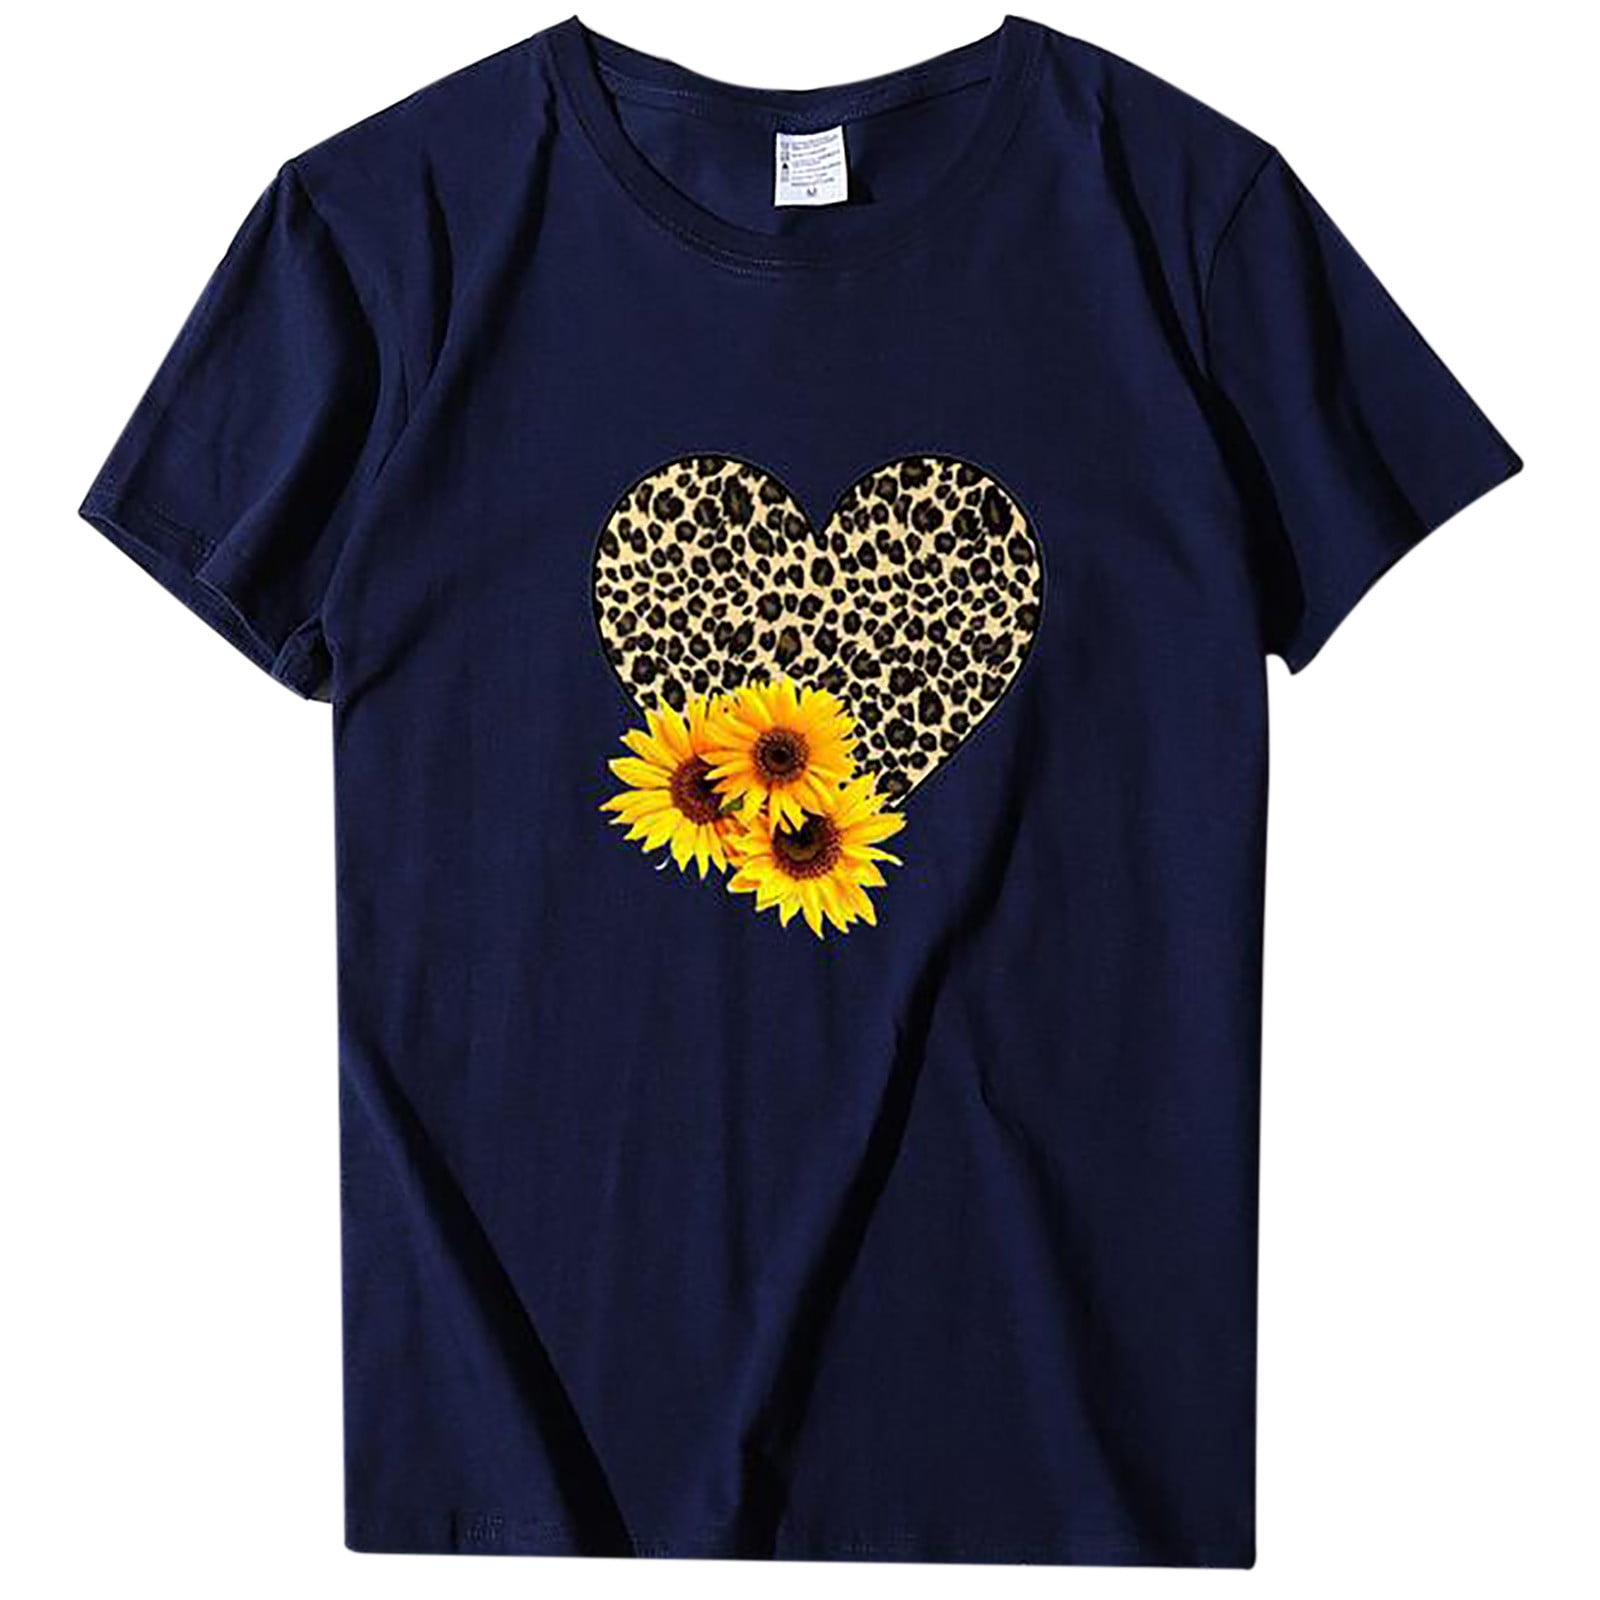 Women's Valentines Day Shirts Love Heart Print 3/4 Sleeve T Shirt Blouse  Trendy Round Neck Tunic Tops Tee Blouses at  Women's Clothing store